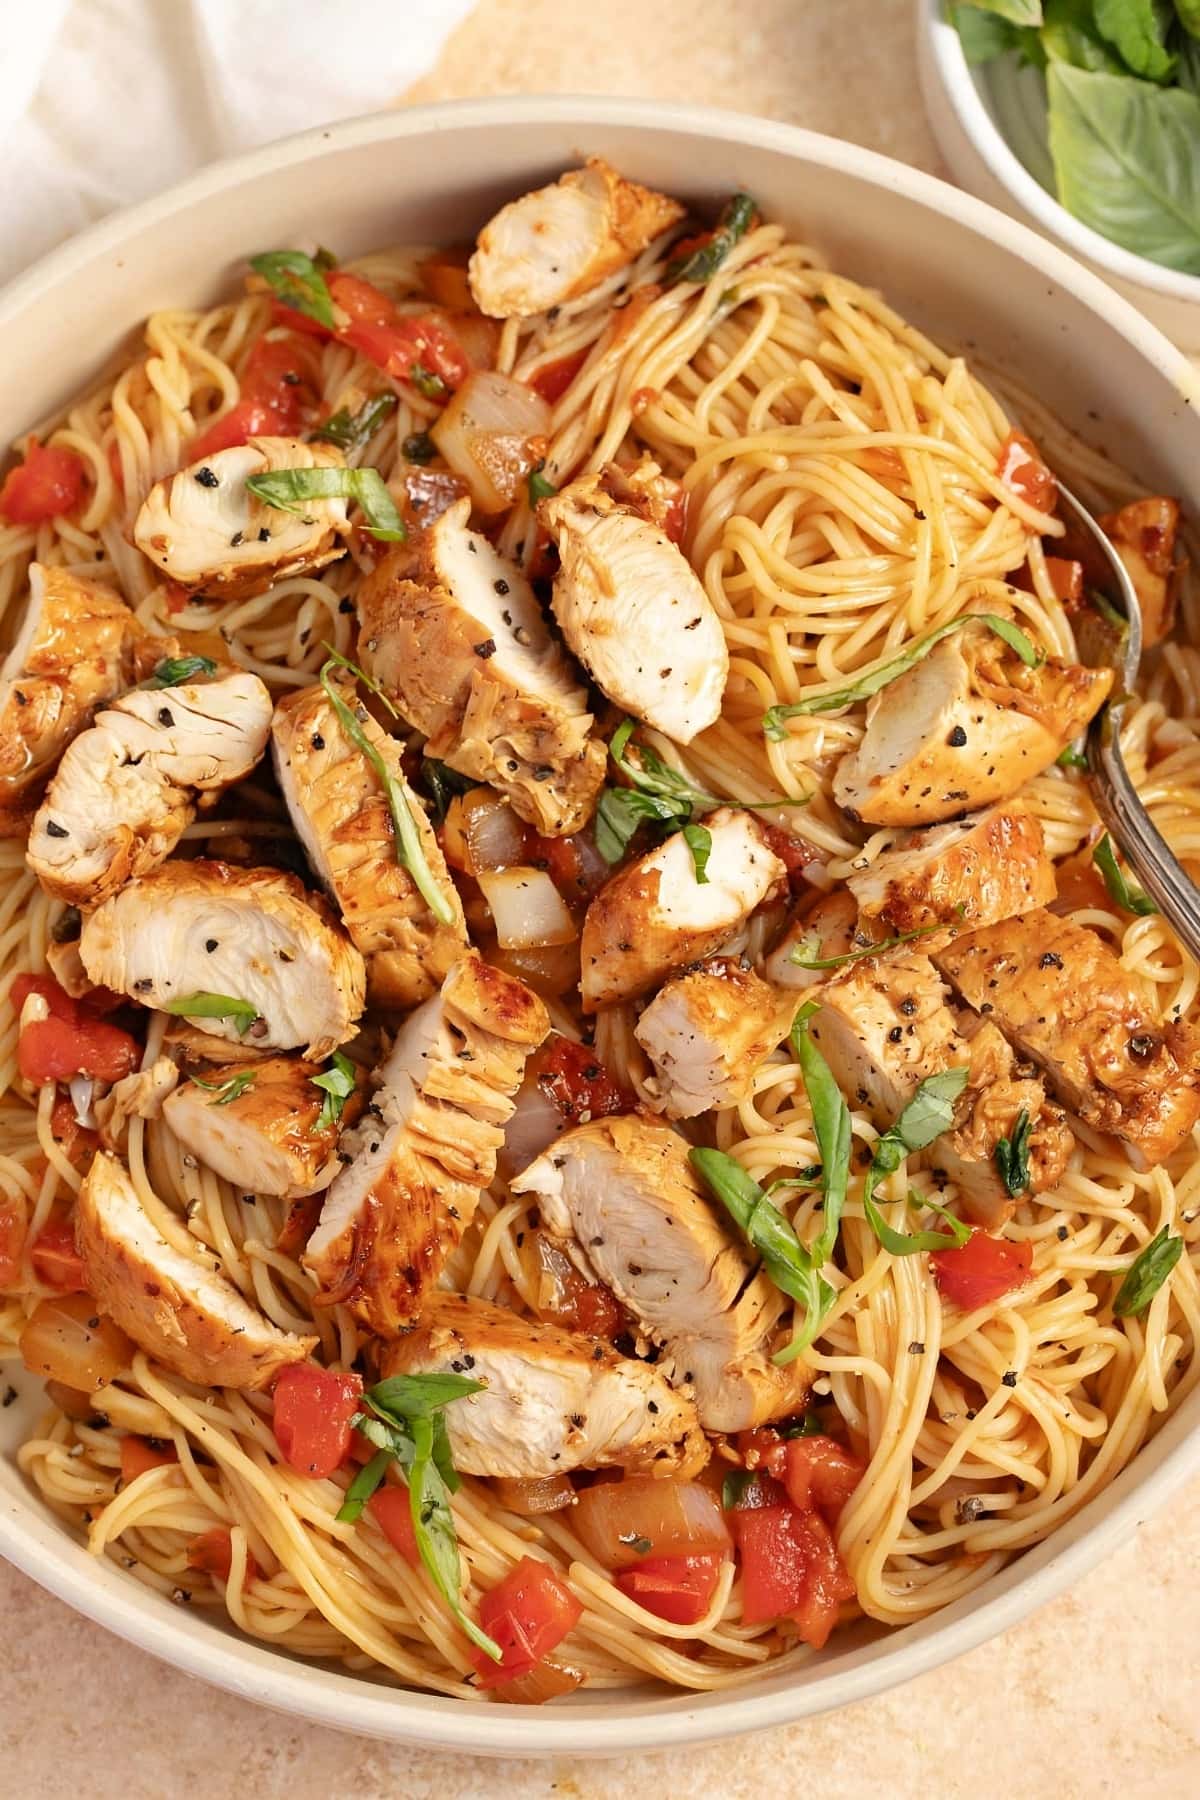 Homemade Bruschetta Chicken Pasta with Tomatoes and Basil in a Bowl